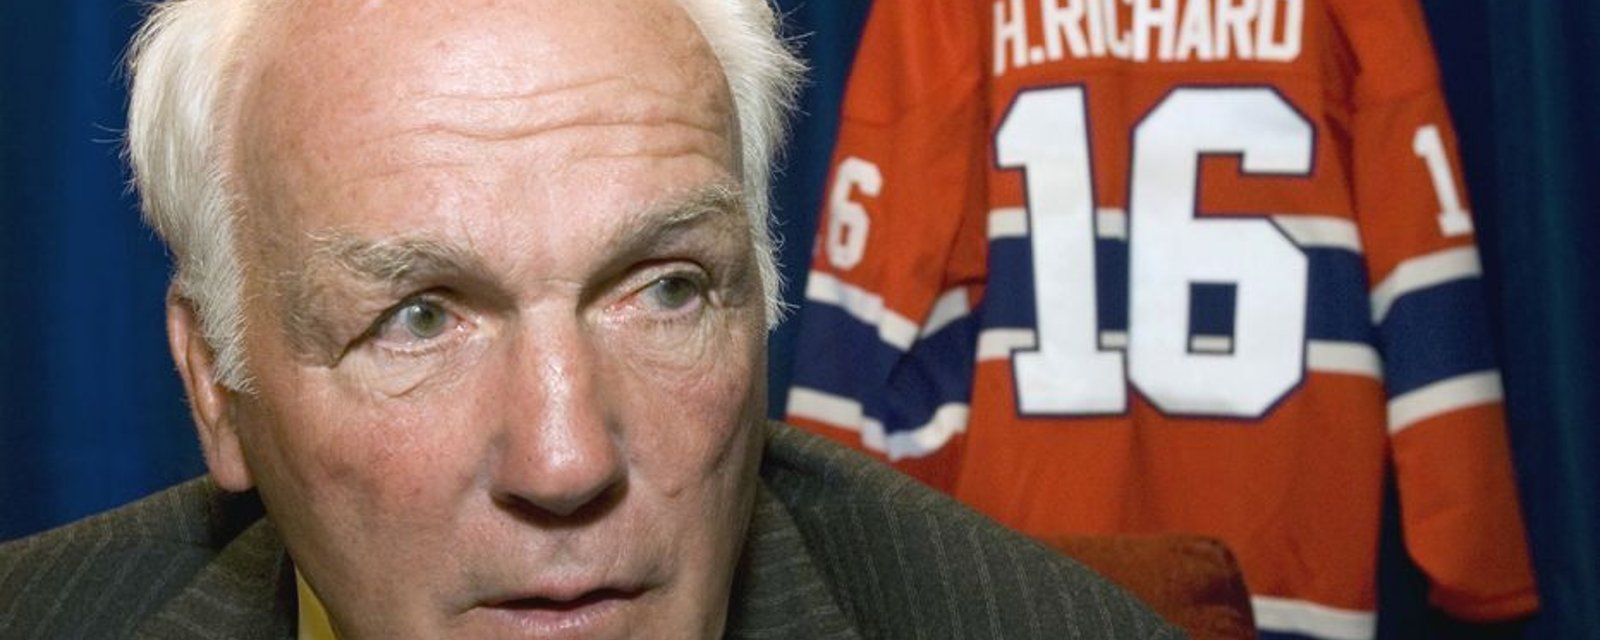 Henri Richard's funeral closed to the public